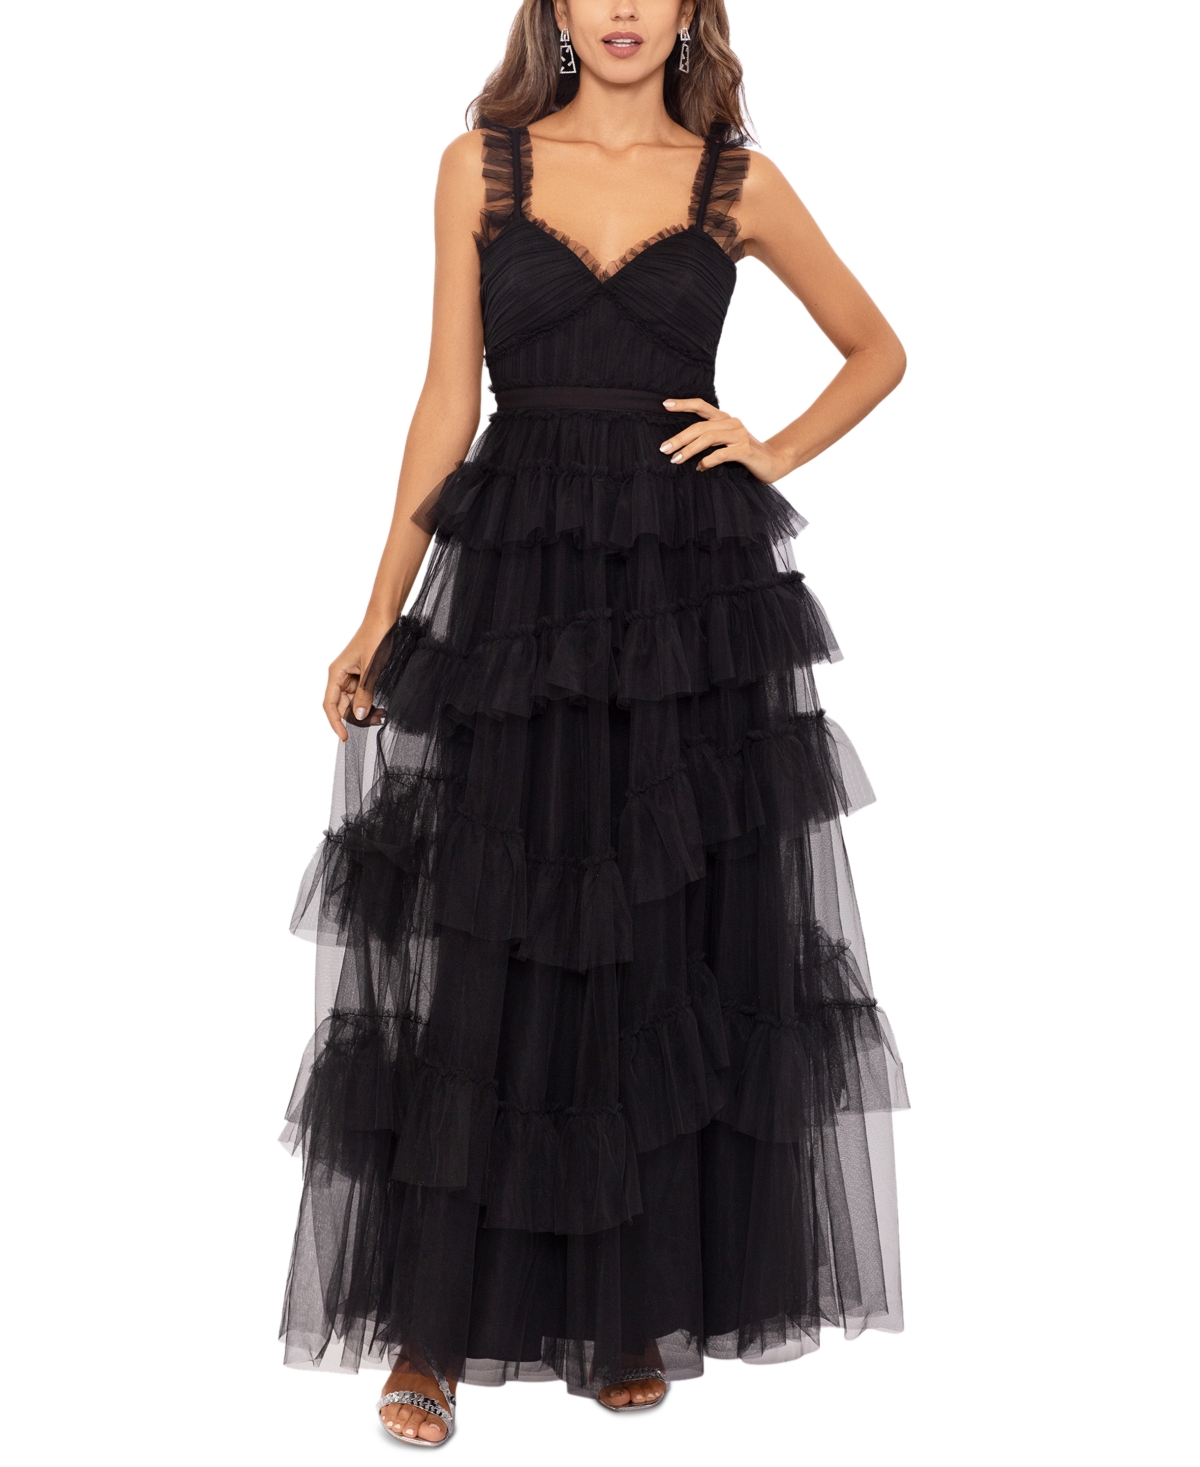 1940s Evening, Prom, Party, Formal, Ball Gowns Betsy  Adam Womens Ruffled Tiered Gown - Black $299.00 AT vintagedancer.com